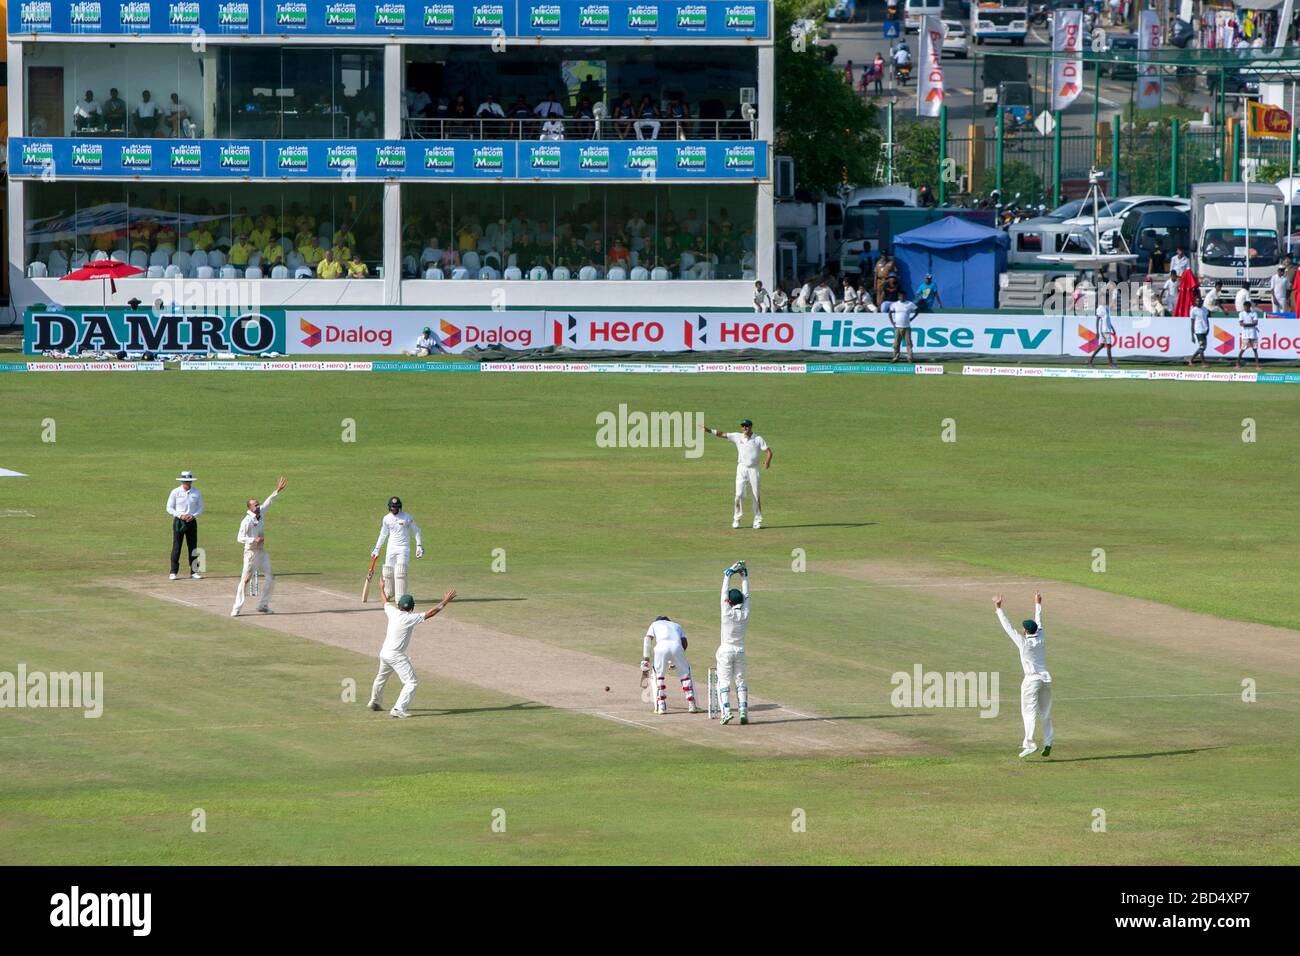 A Test match between Sri Lanka and Australia being played at Galle International Cricket Ground at Galle in Sri Lanka. Australia is appealing for LBW. Stock Photo